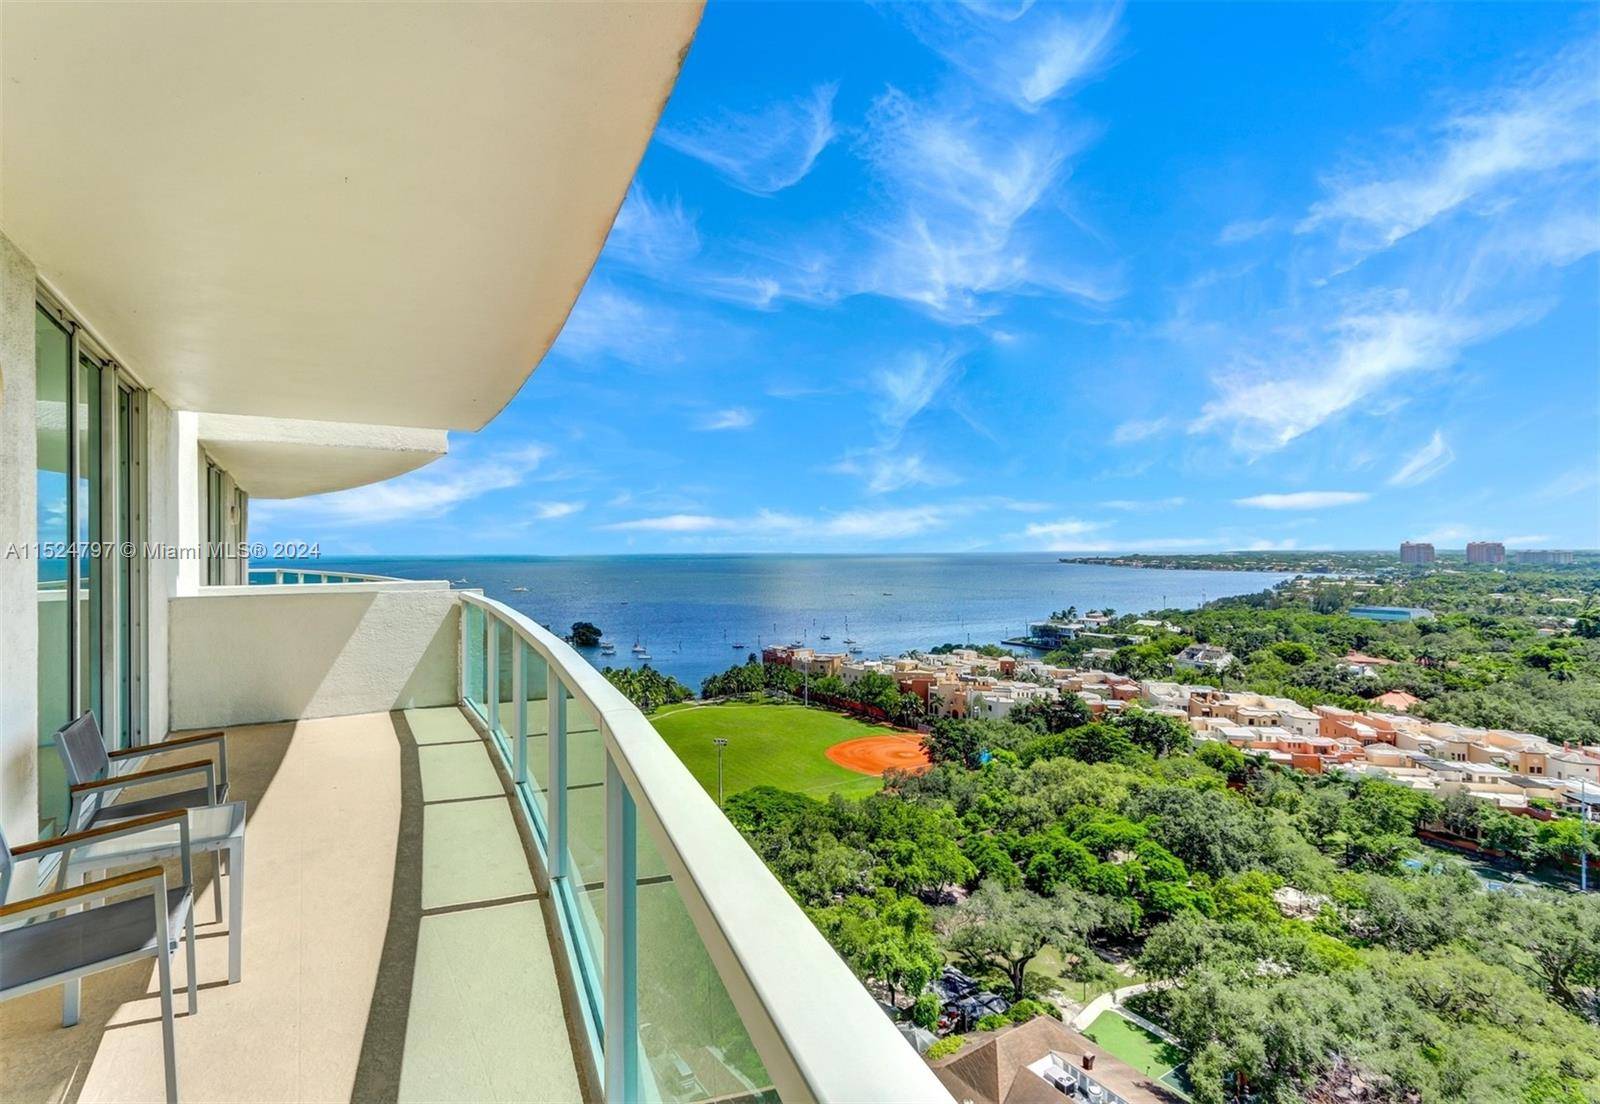 Spectacular bay views from this stunning corner residence w wrap around balcony in Arya, a full service luxury condo hotel in the heart of the Coconut Grove.